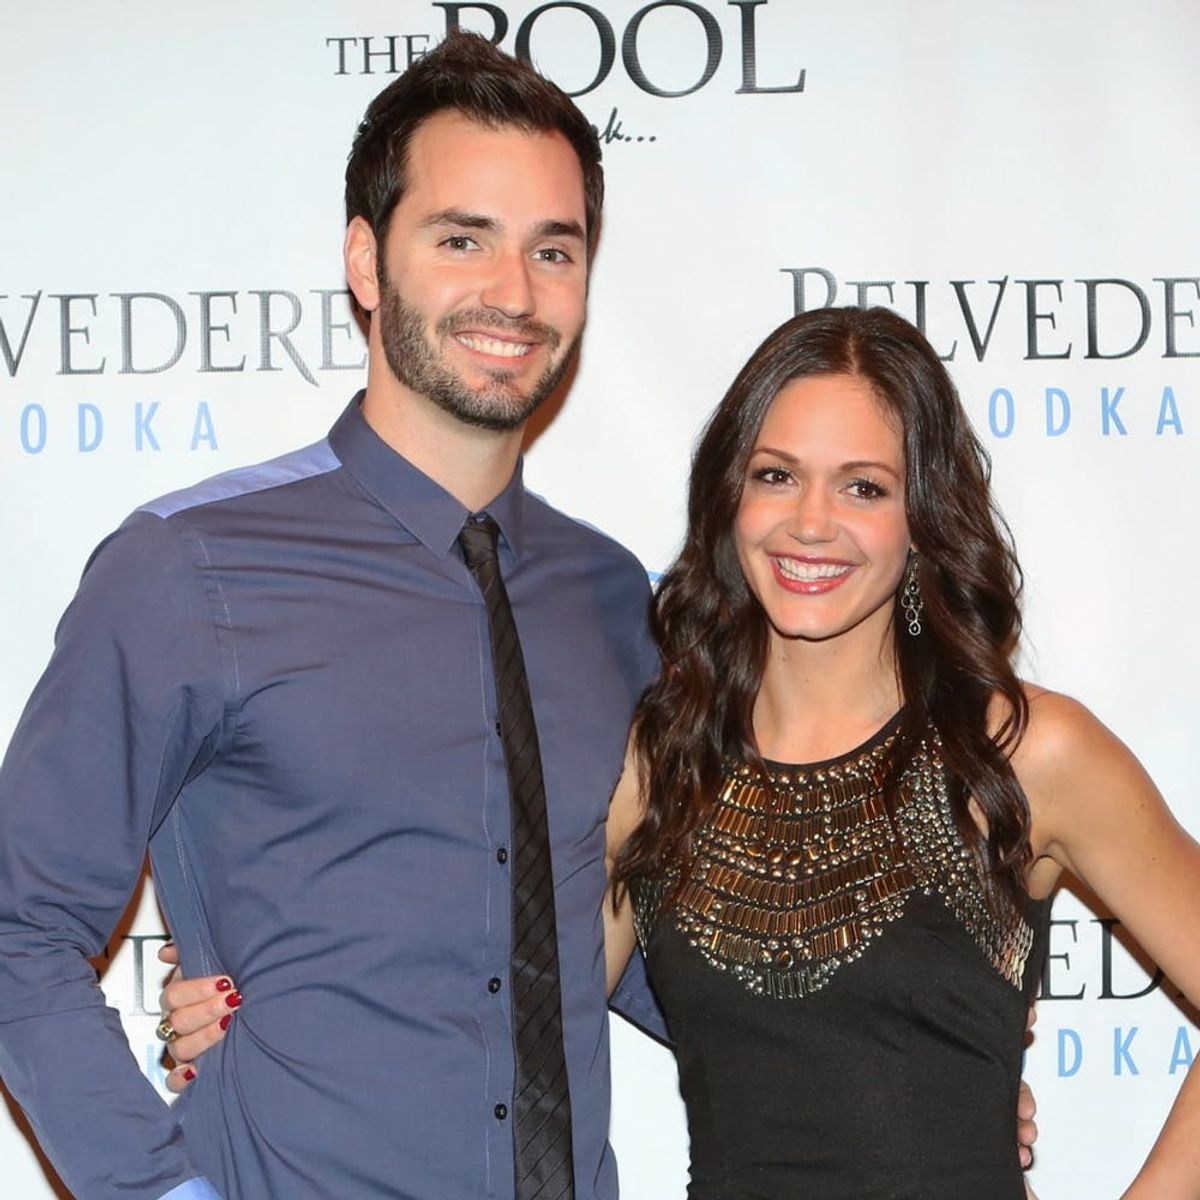 ‘Bachelorette’ Star Desiree Hartsock Just Revealed the Sex of Baby #2